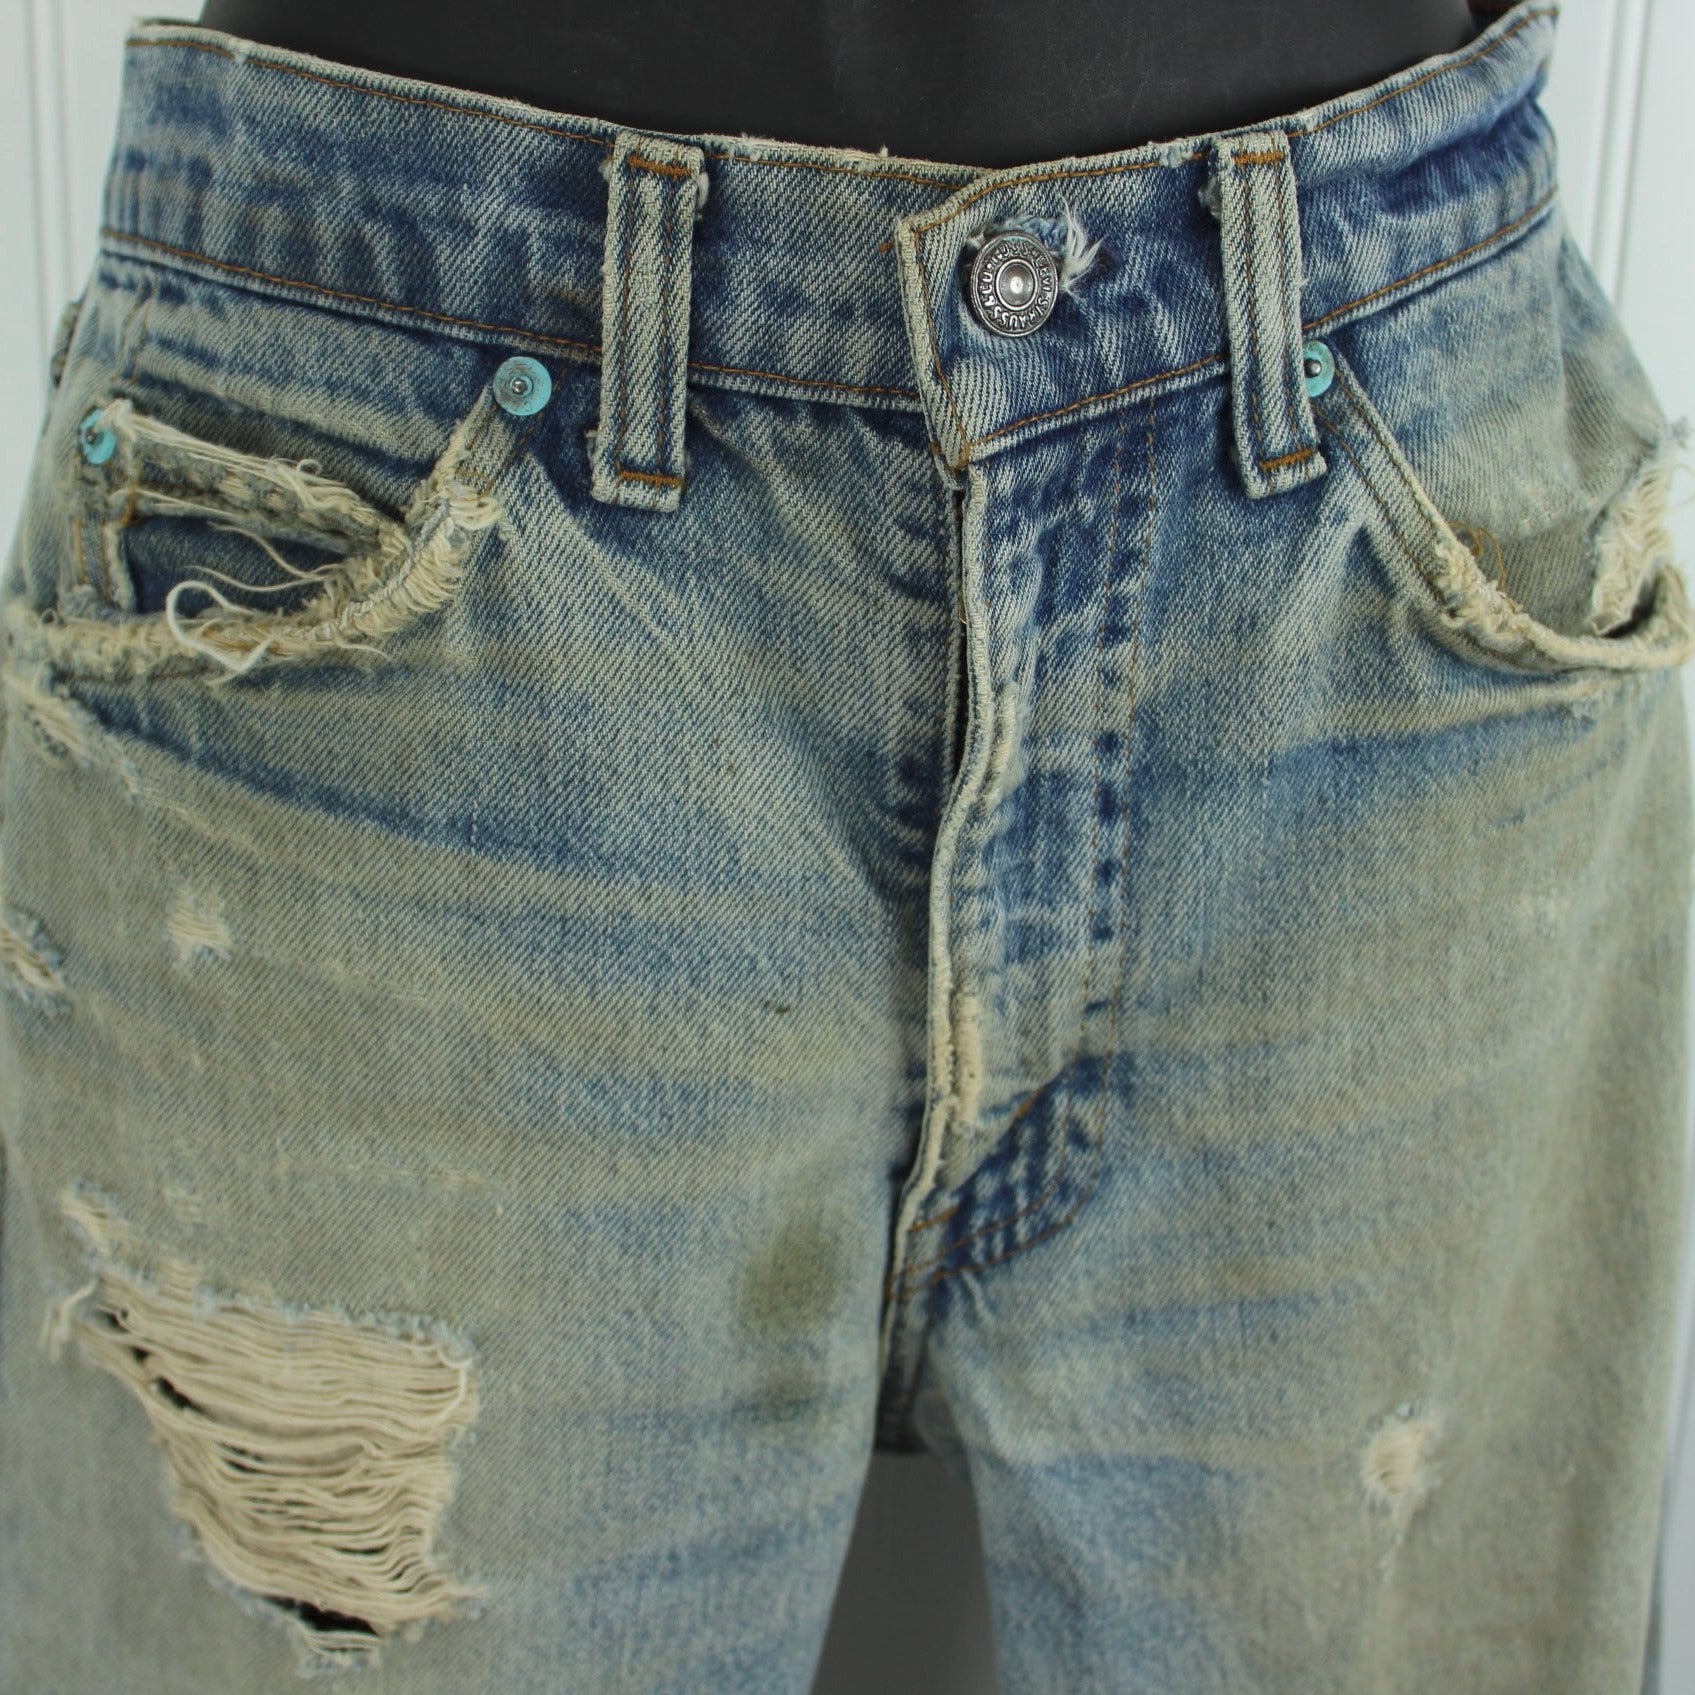 Vintage Levi's Skater Boarder Heavy Distress Grunge Jeans - Early 1990s - Orange Tab disstressed boarder lace